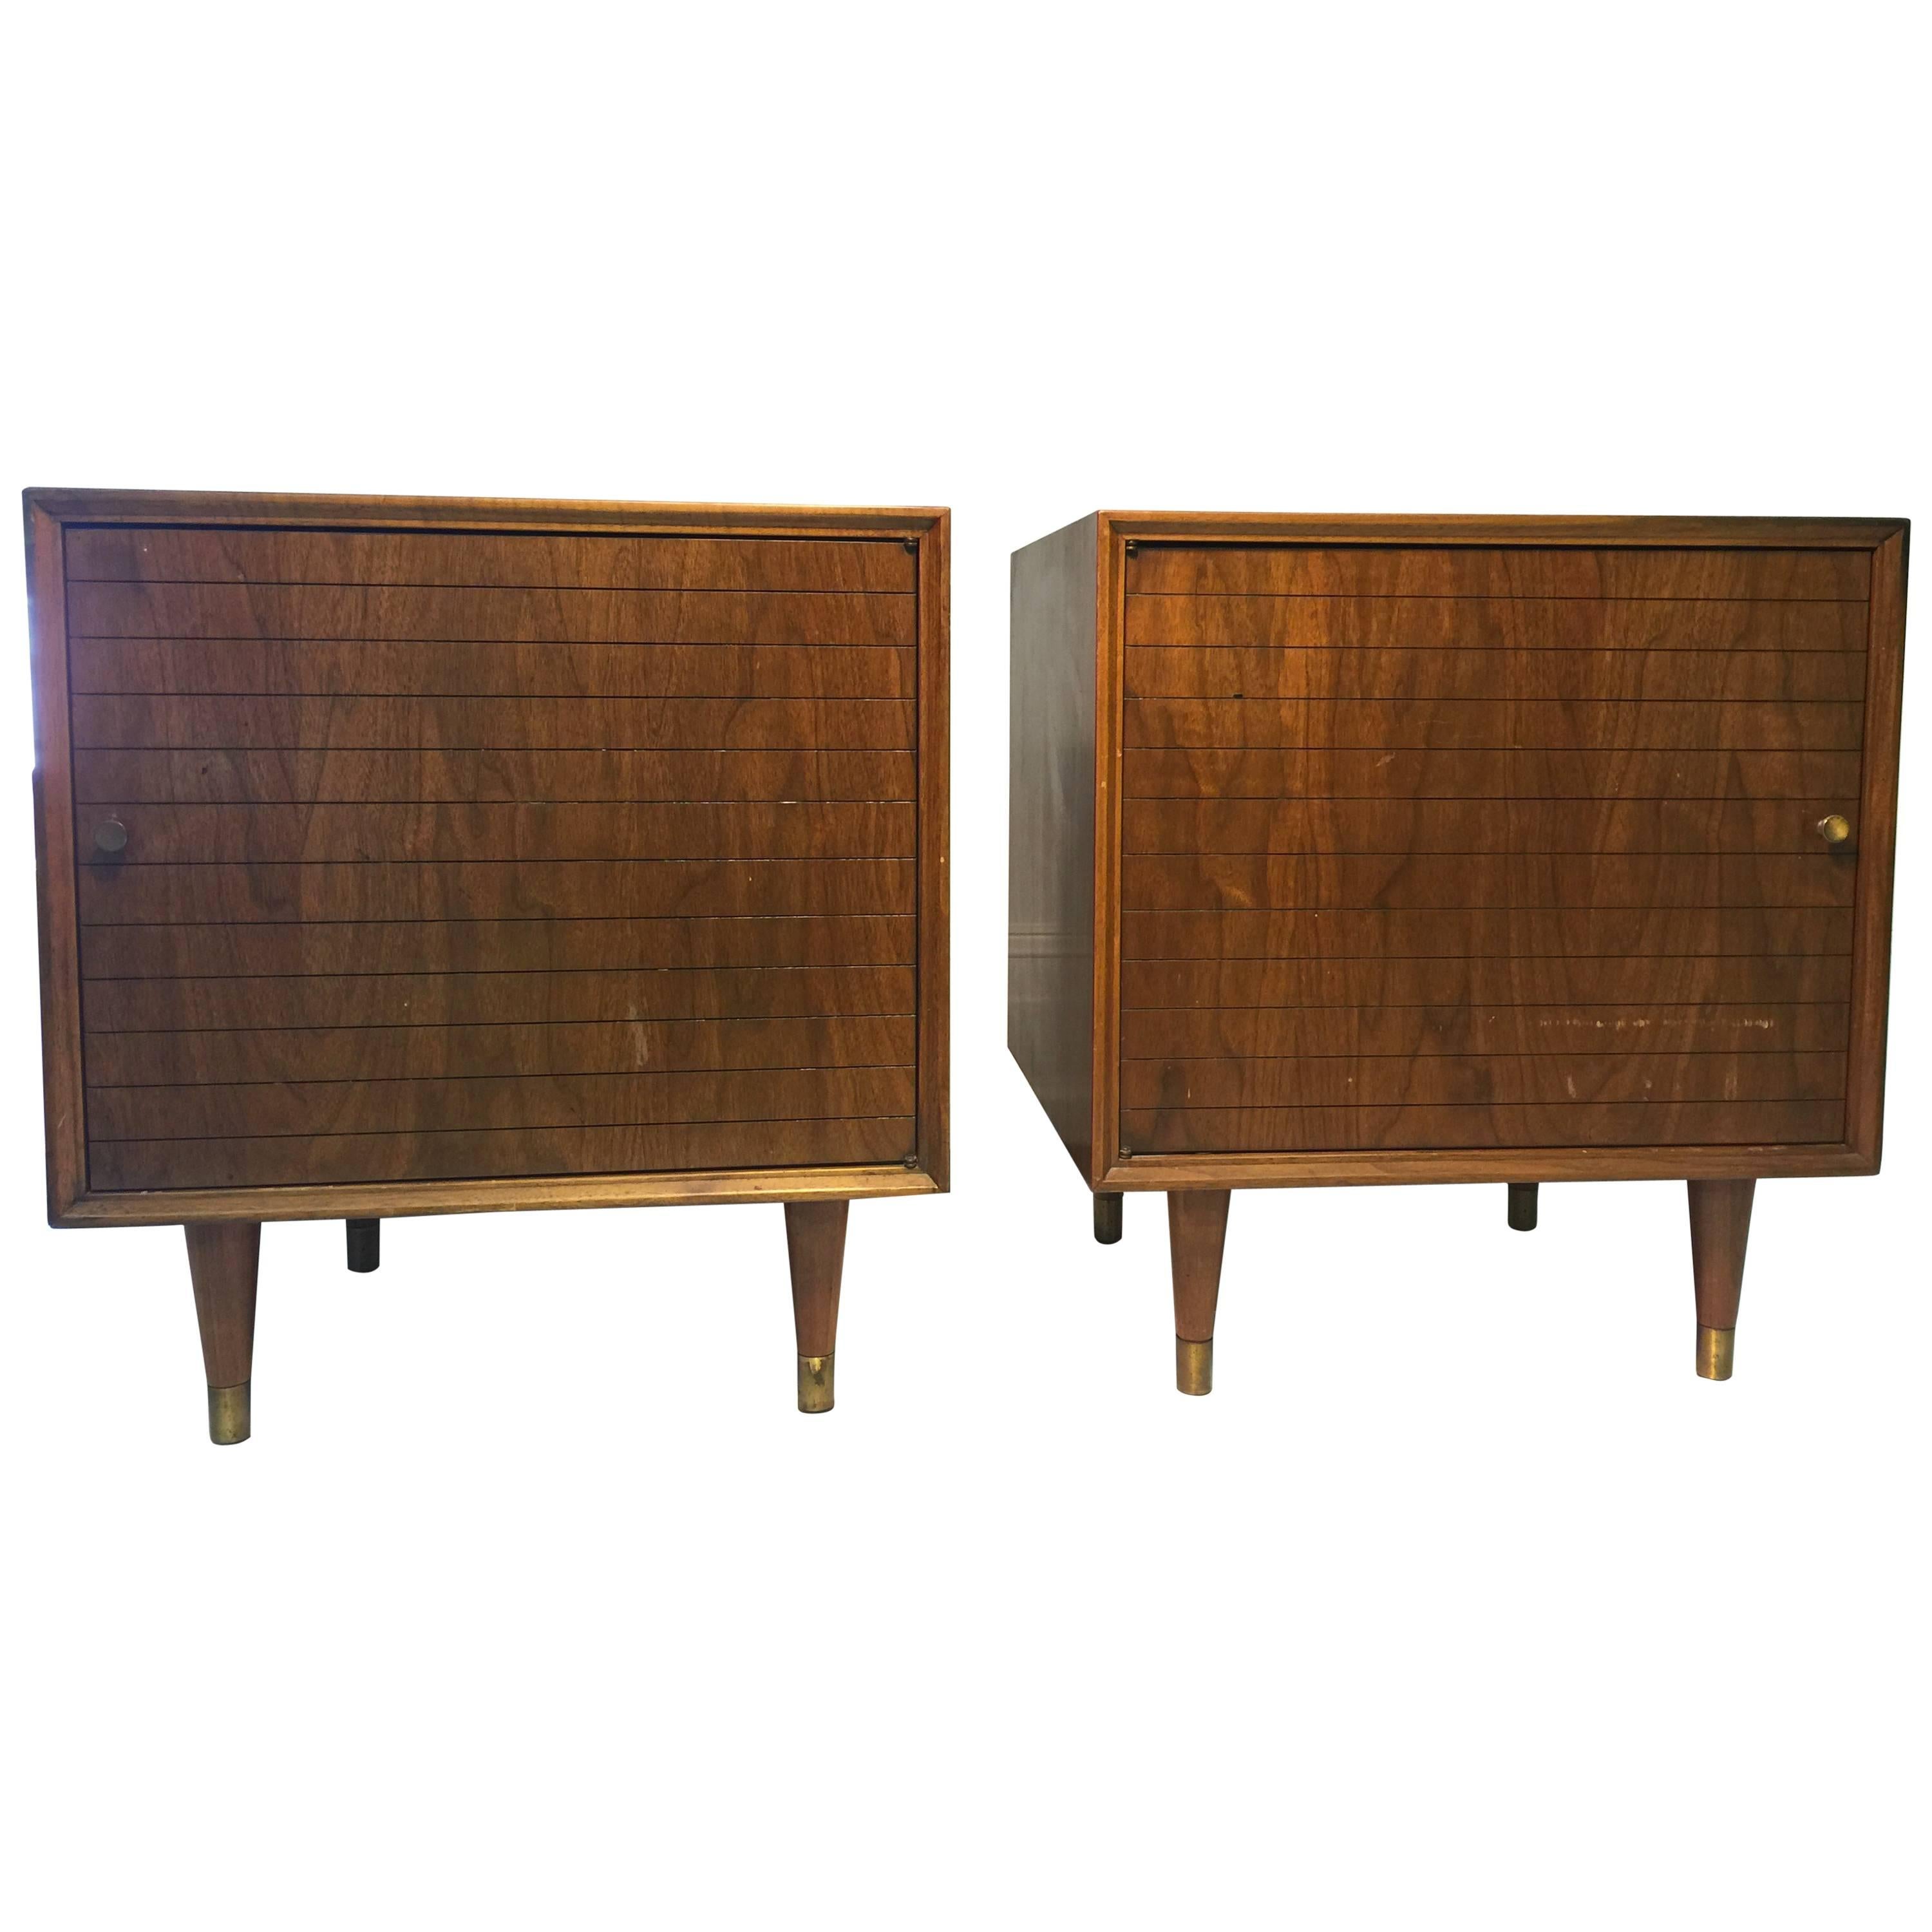 Magnificent Pair of Nightstands in the Manner of Paul McCobb, circa 1960 For Sale